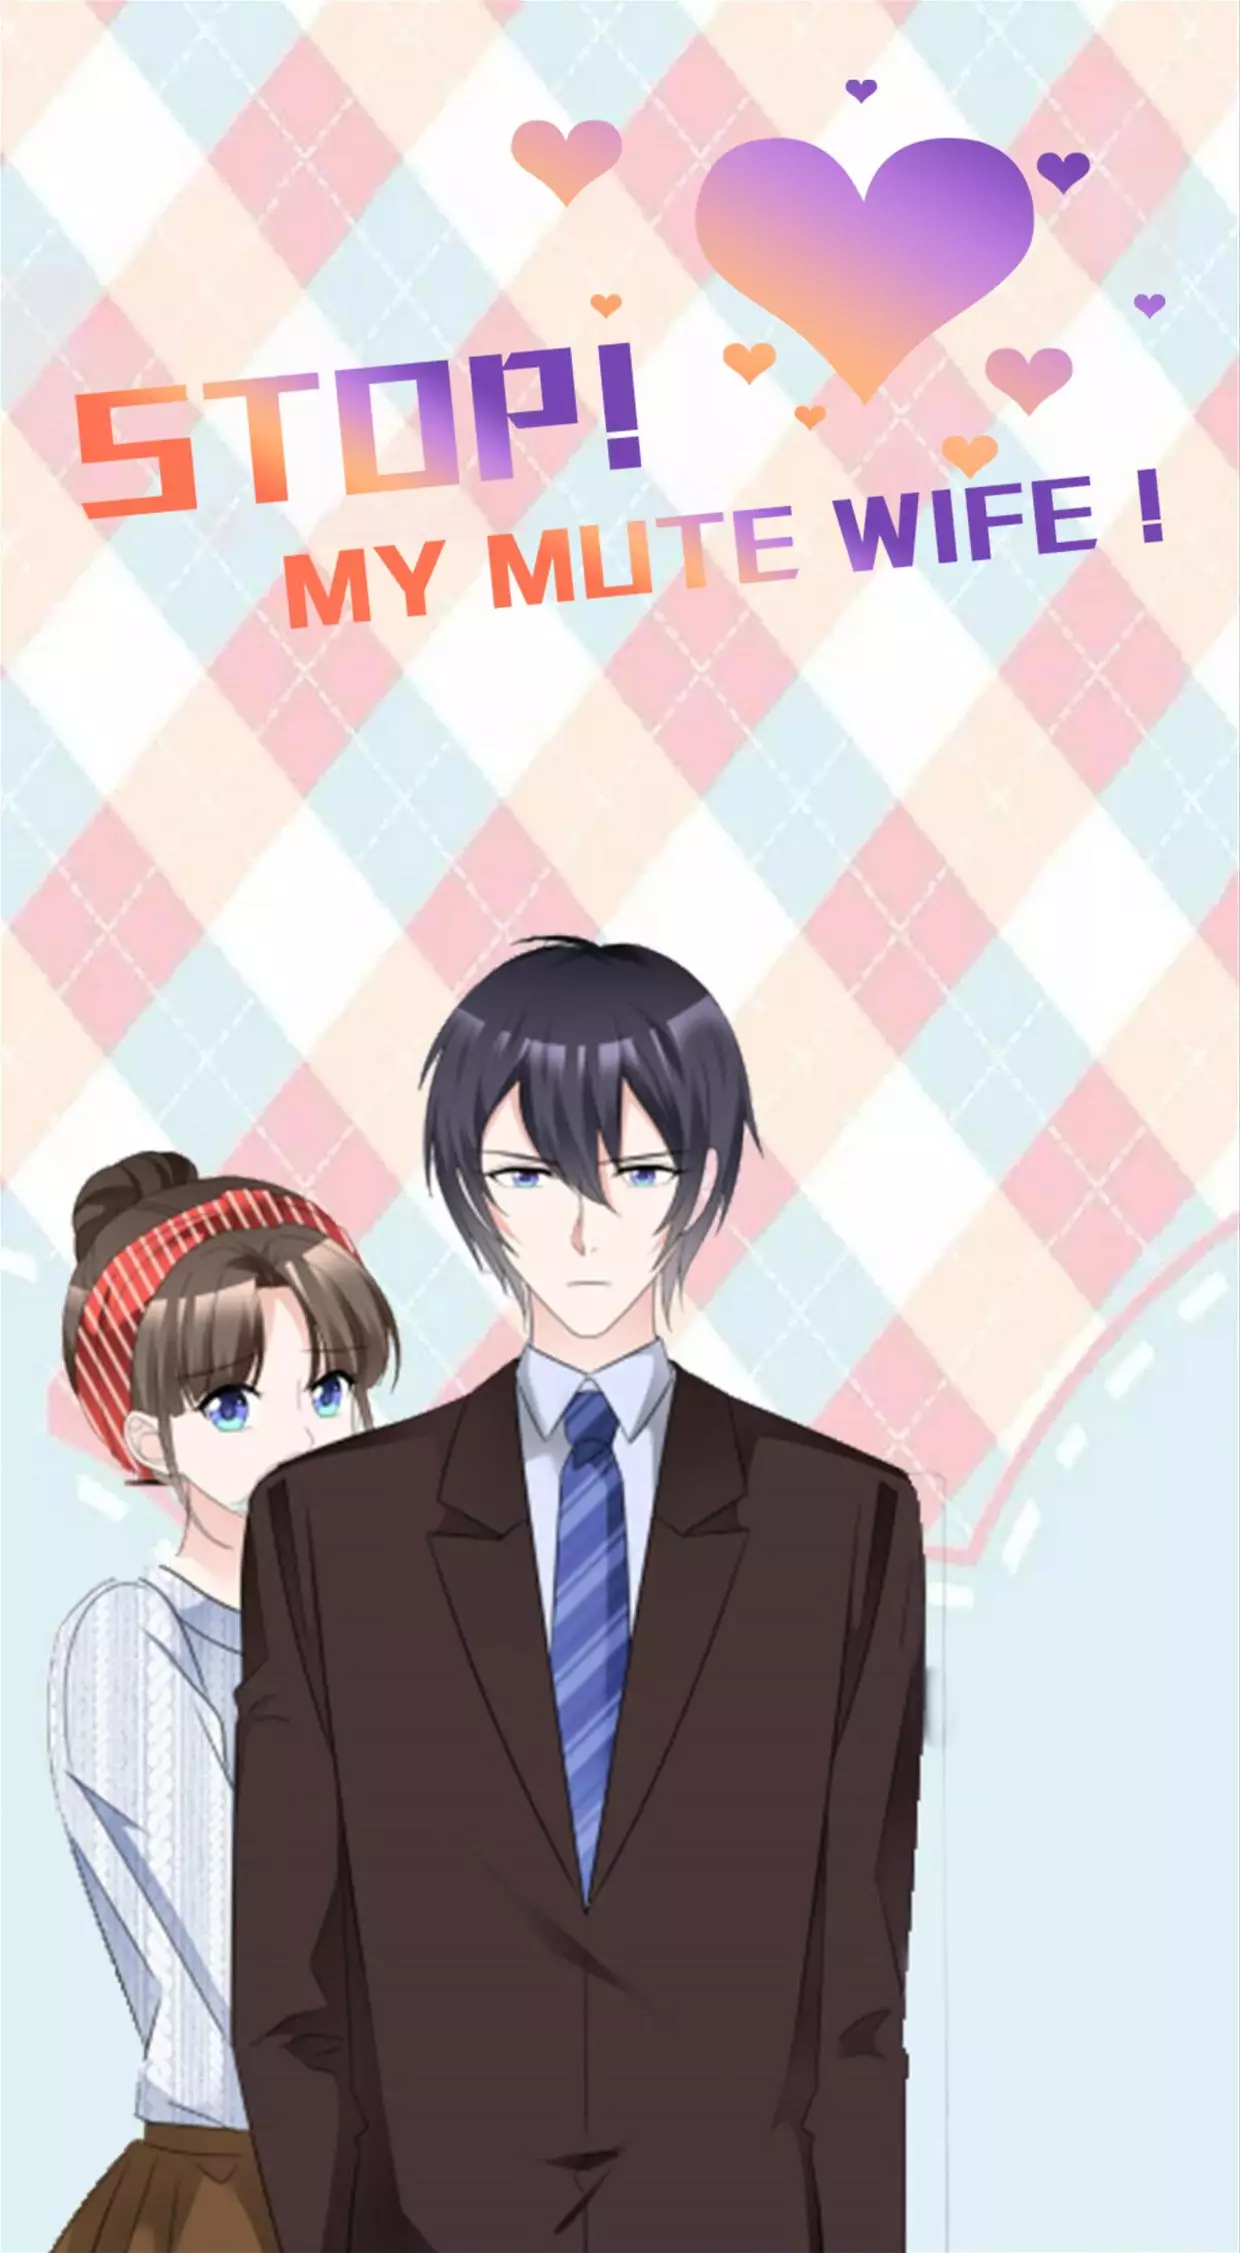 Stop, My Mute Wife! - 38 page 1-9ec2c474